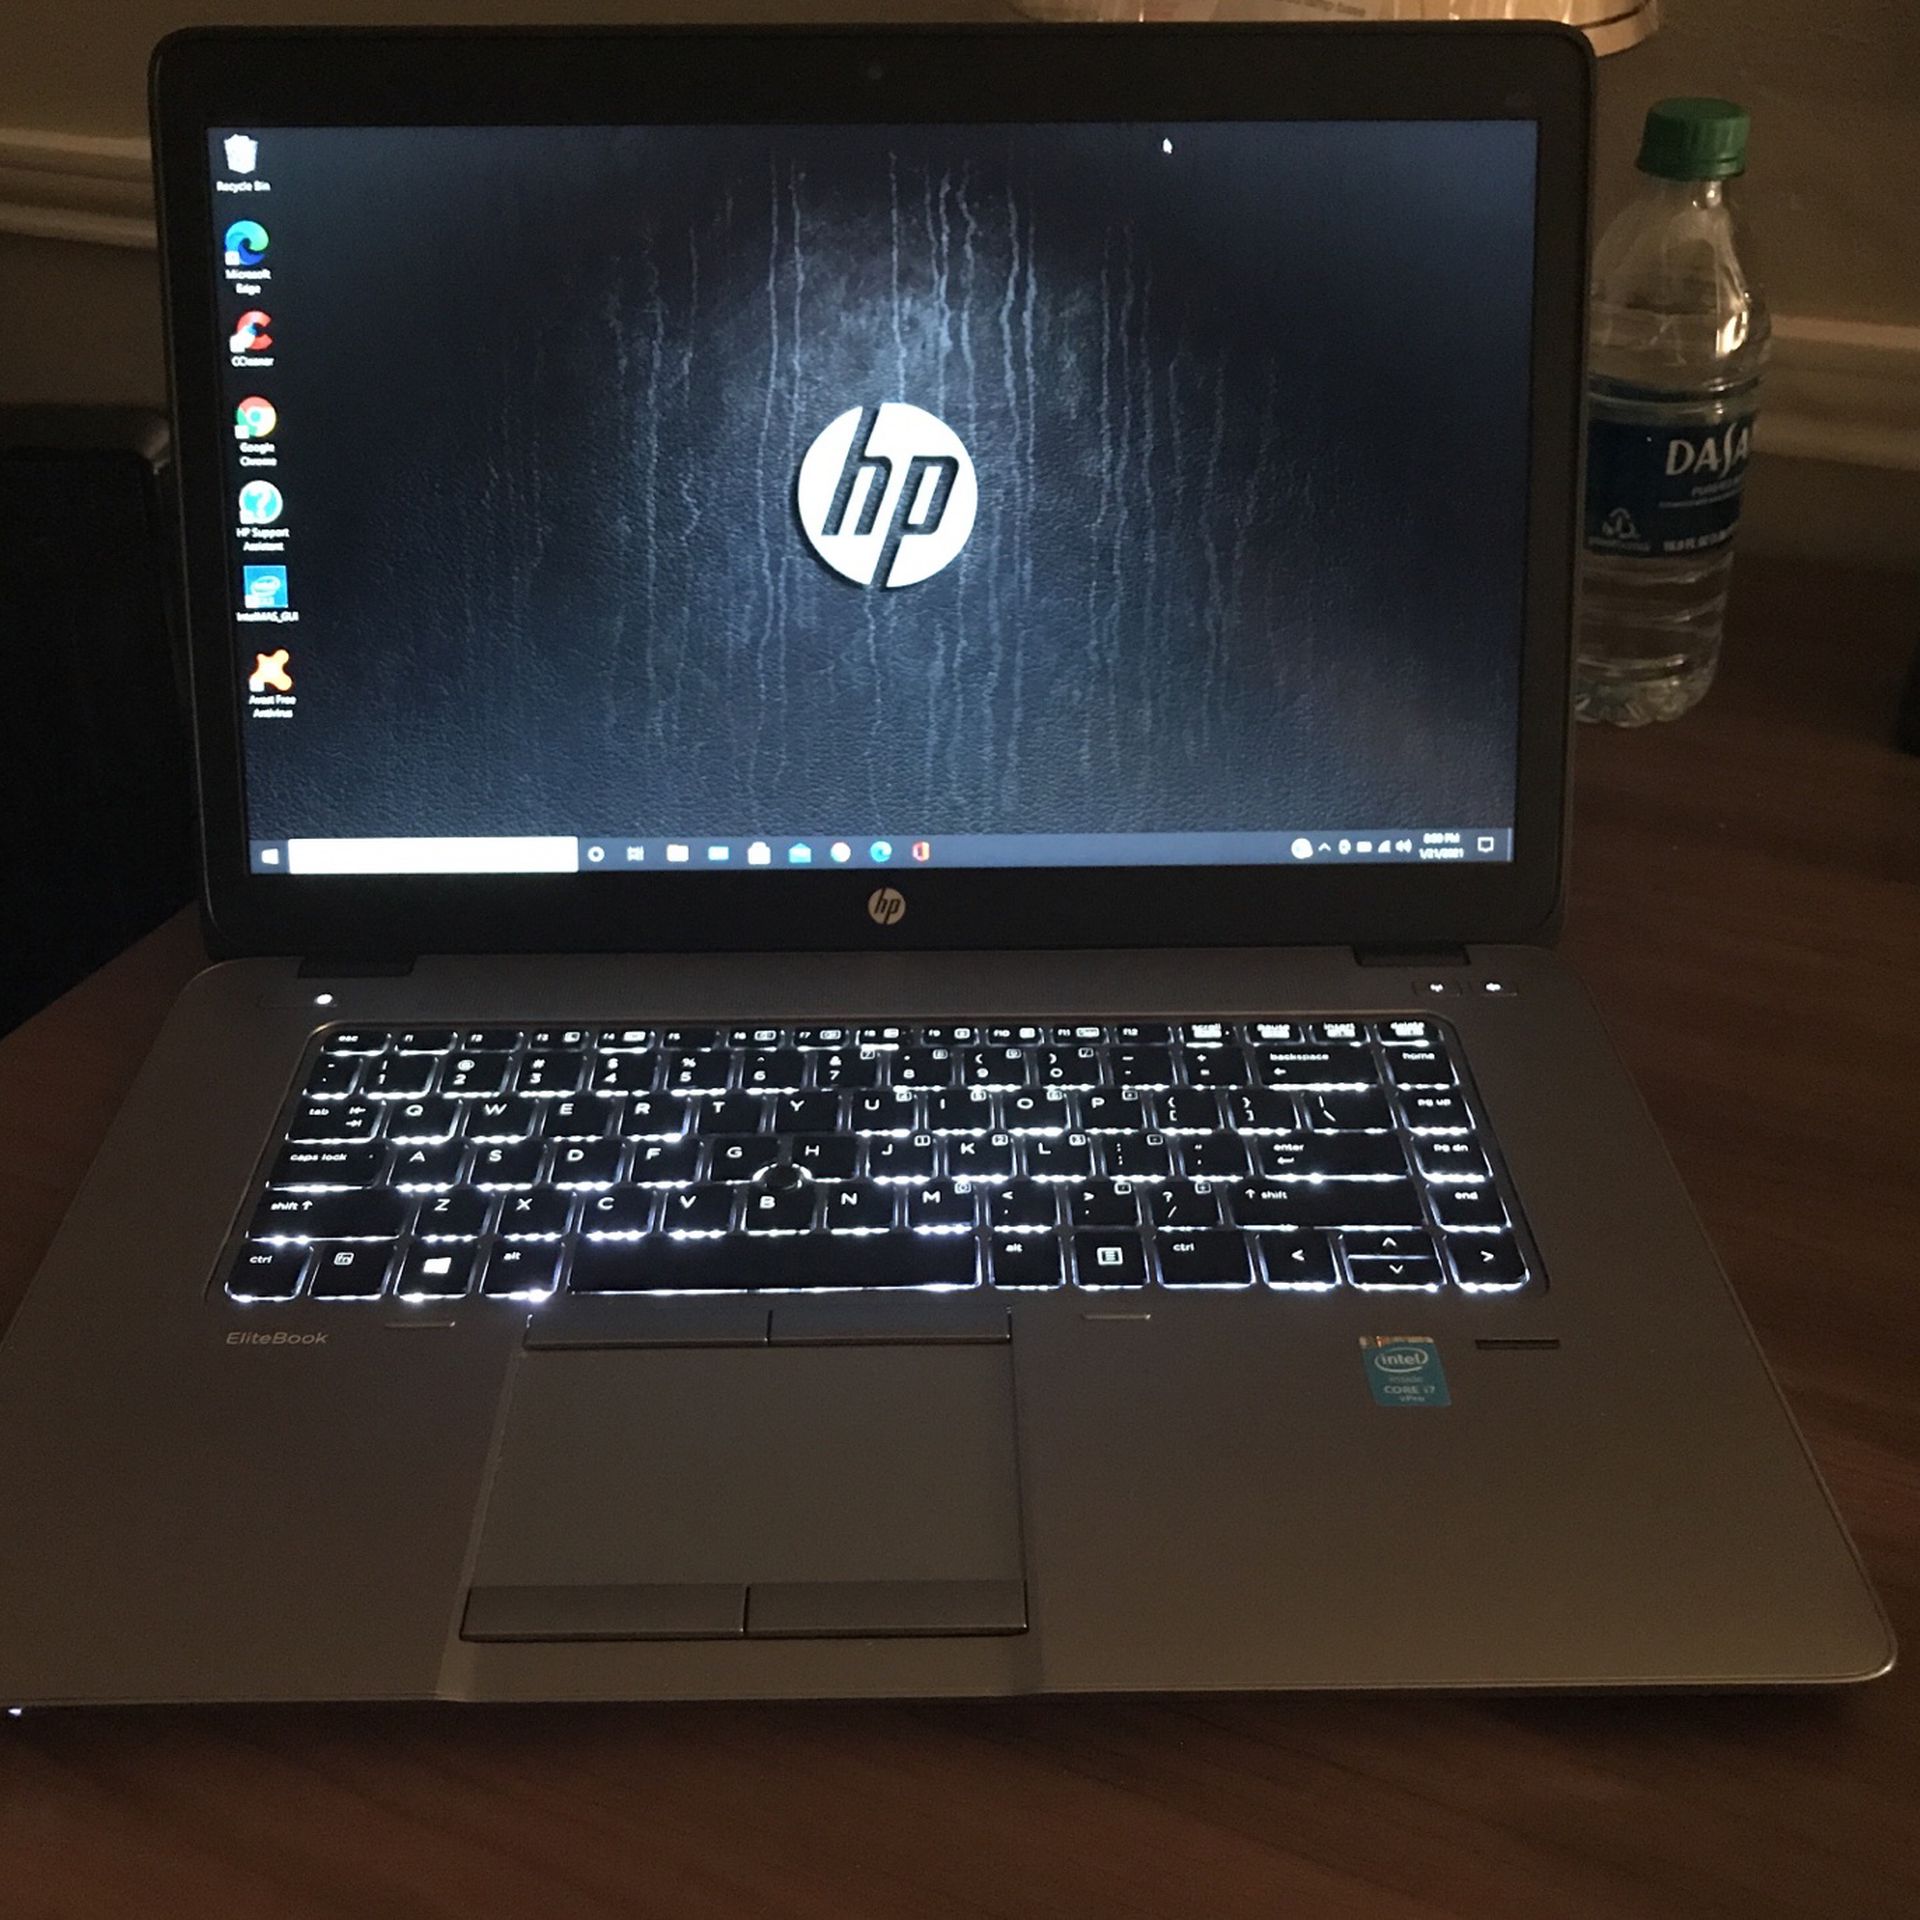 HP Elitebook 850 G2 - Powerful and performs!!!